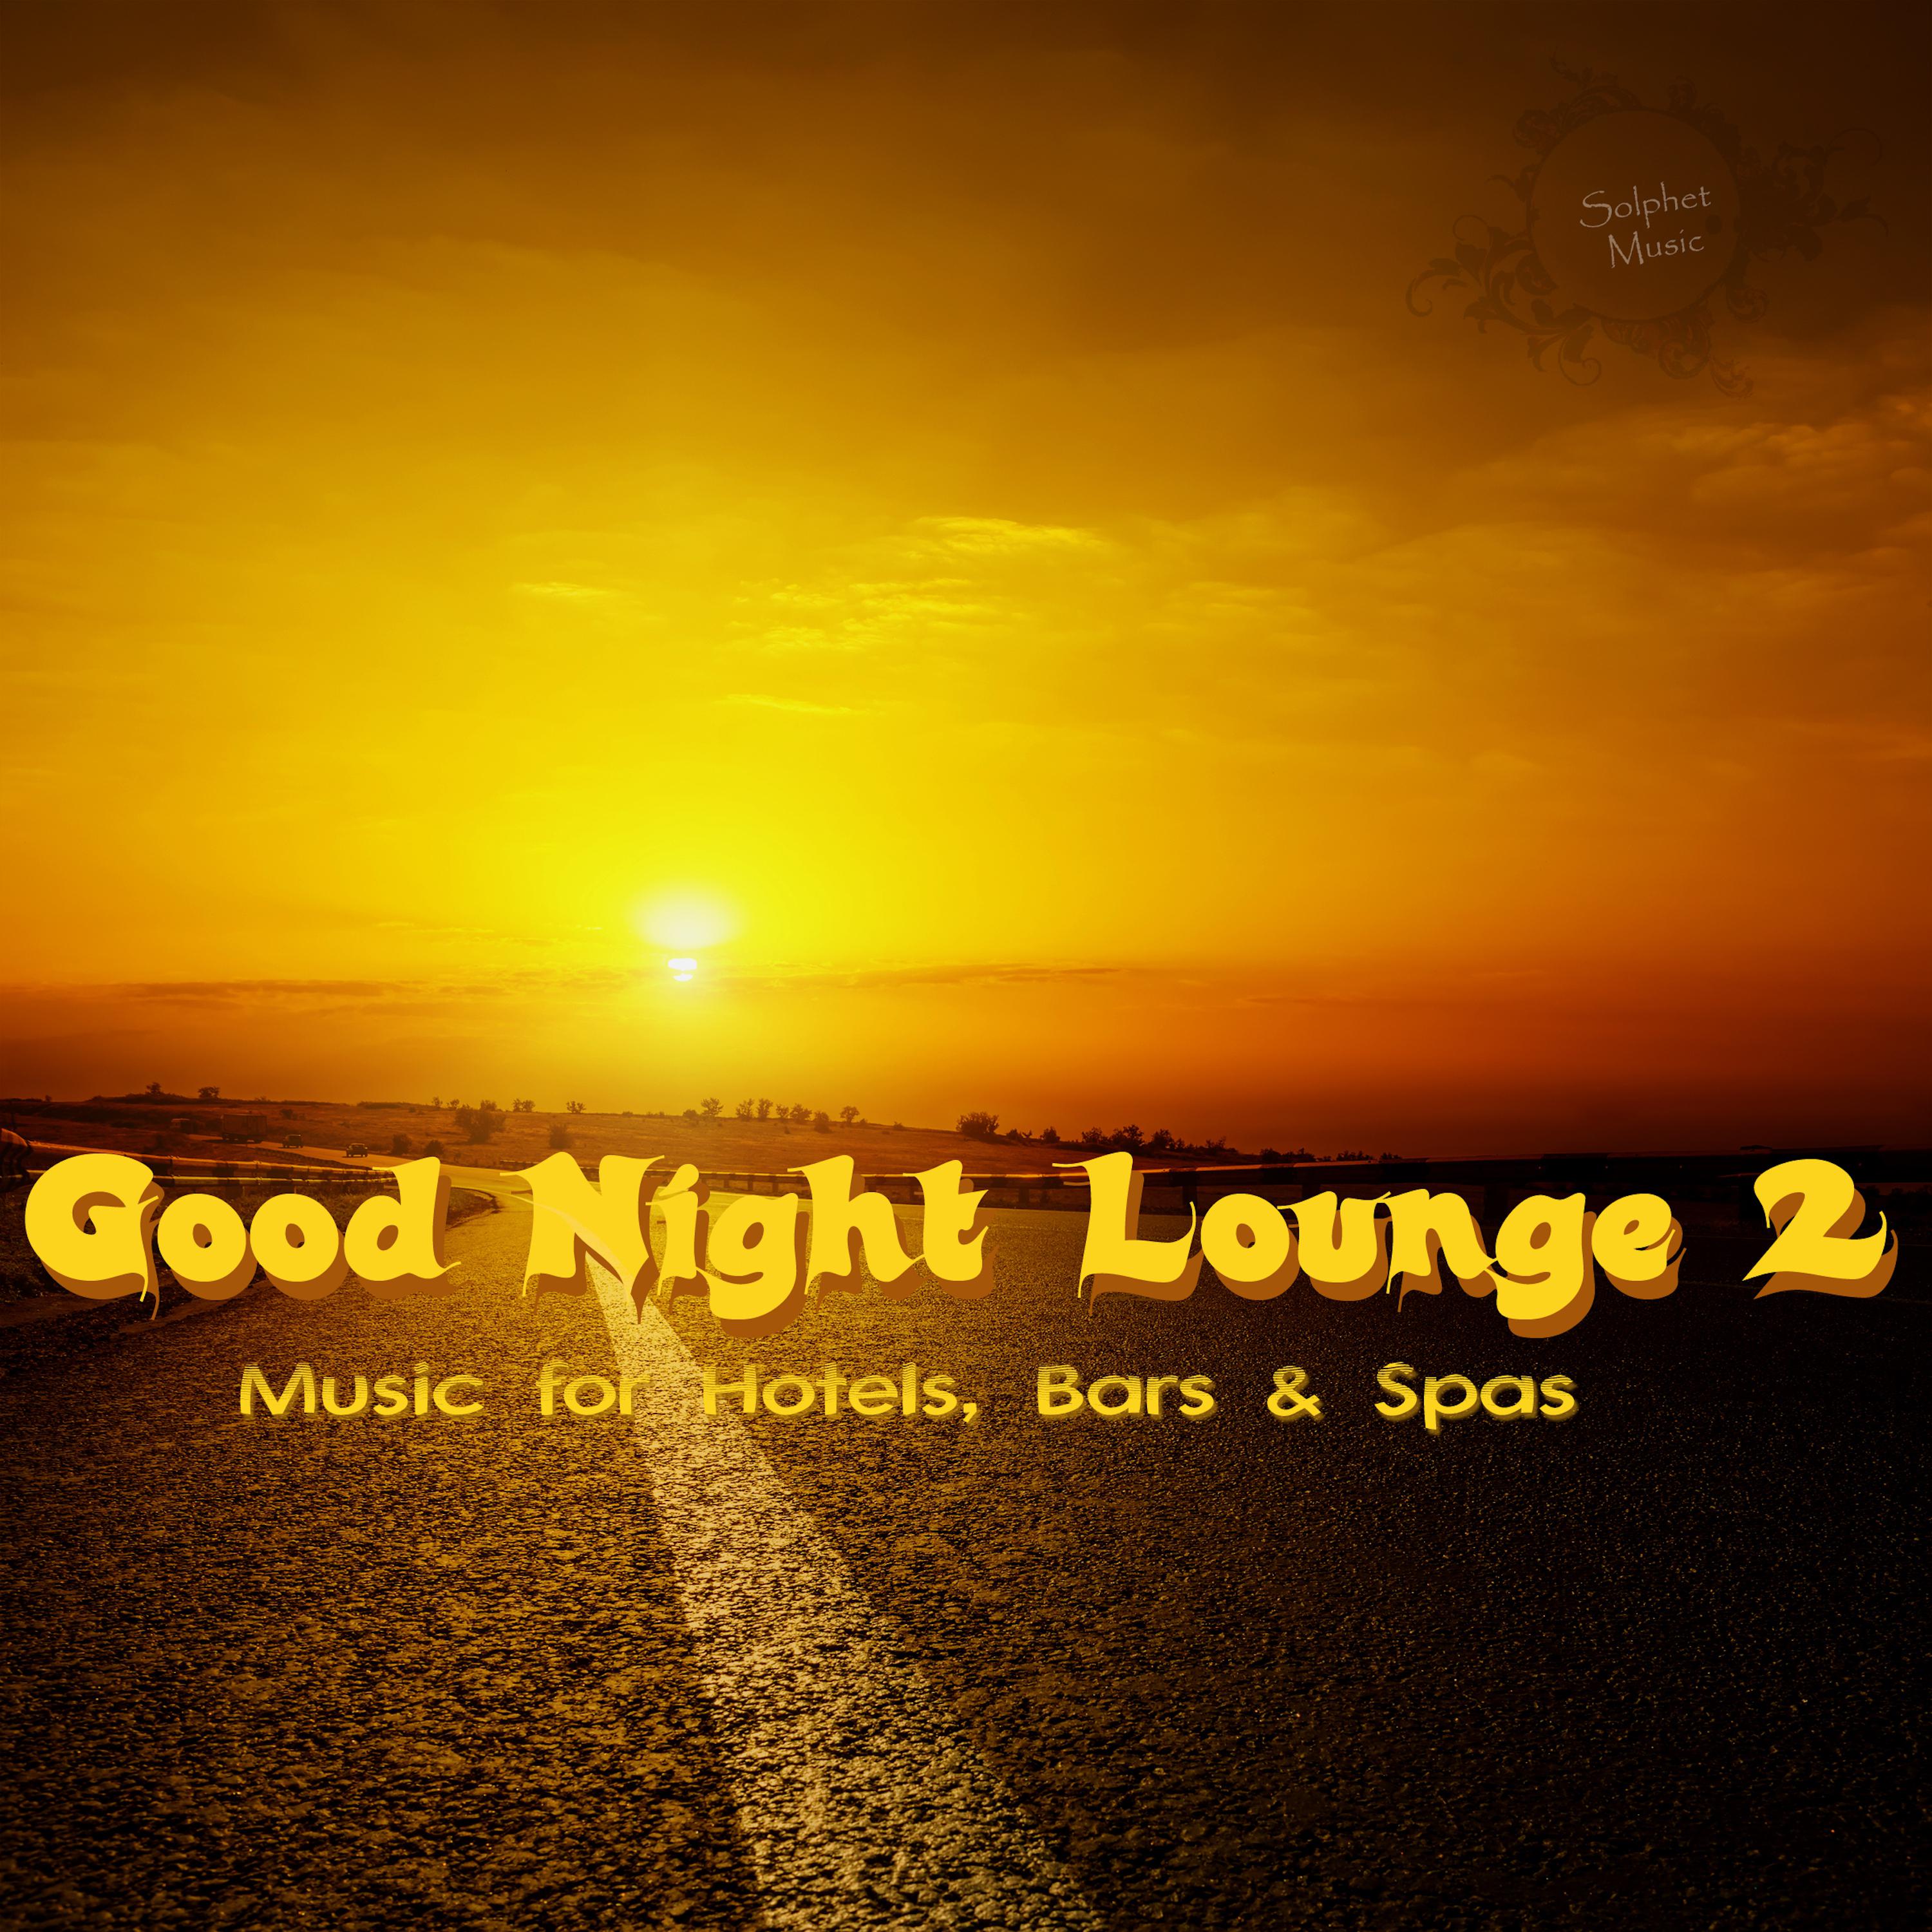 Good Night Lounge 2 (Music for Hotels, Bars & Spas)